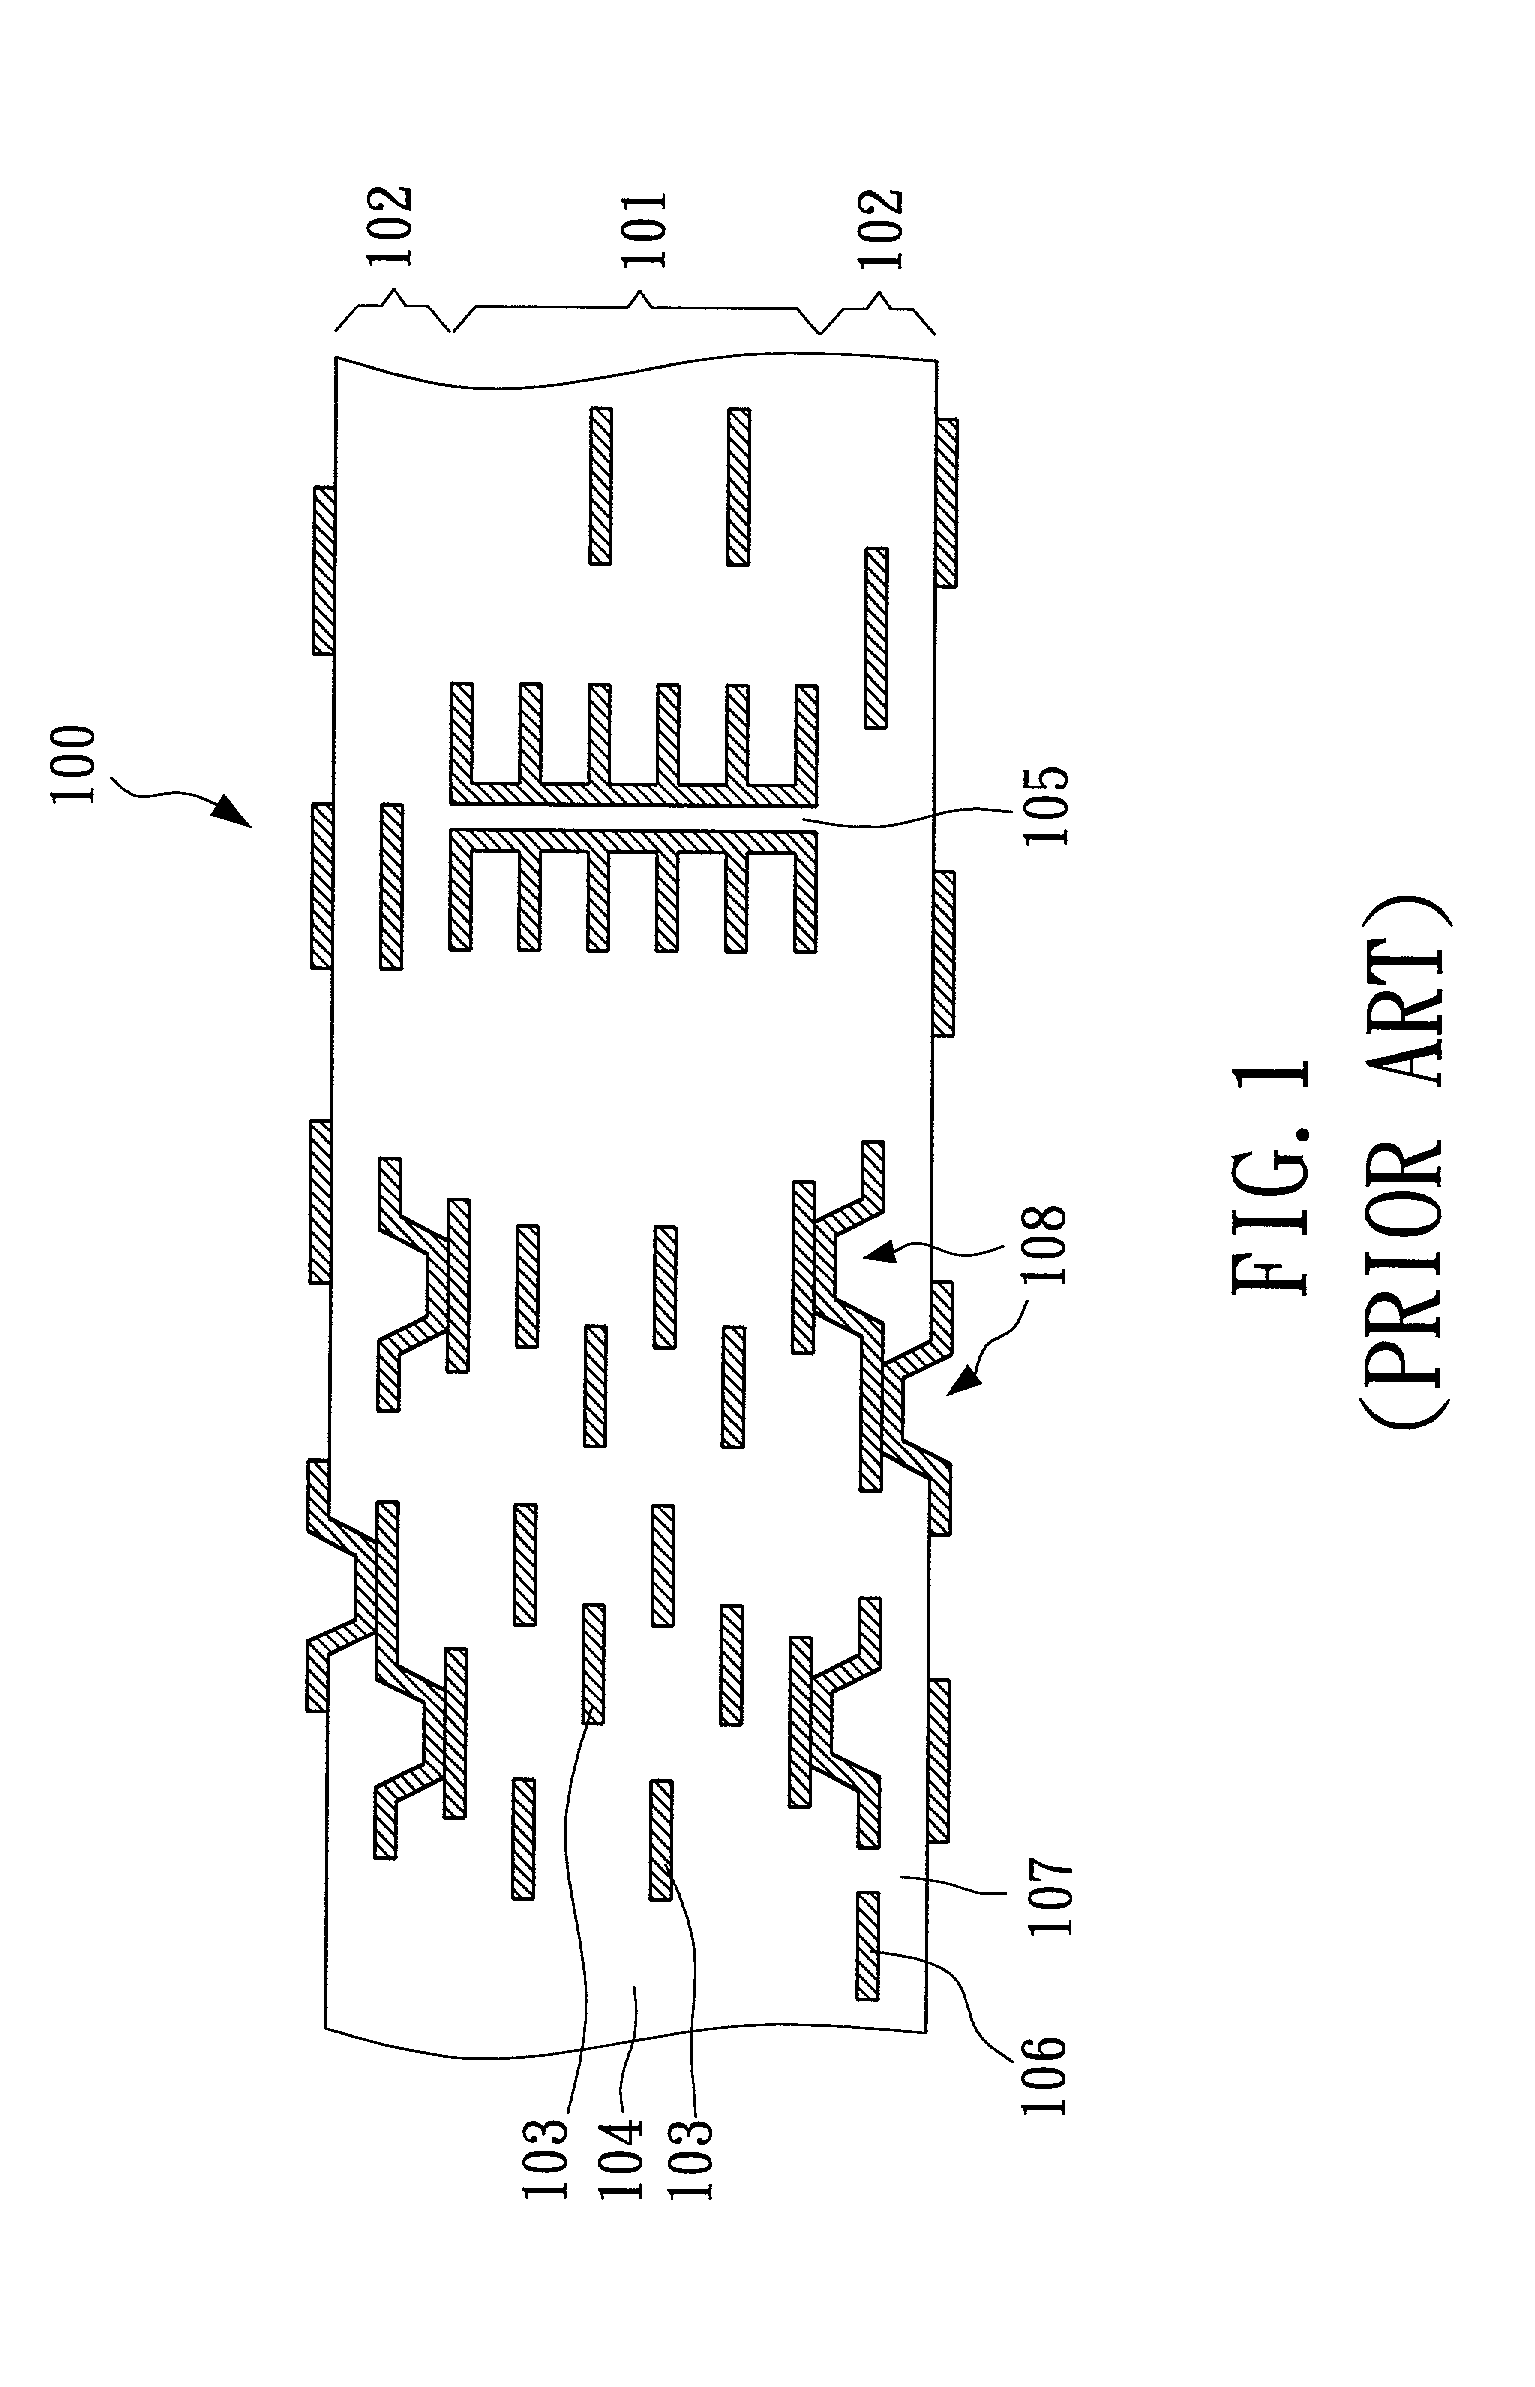 Thin core substrate for fabricating a build-up circuit board